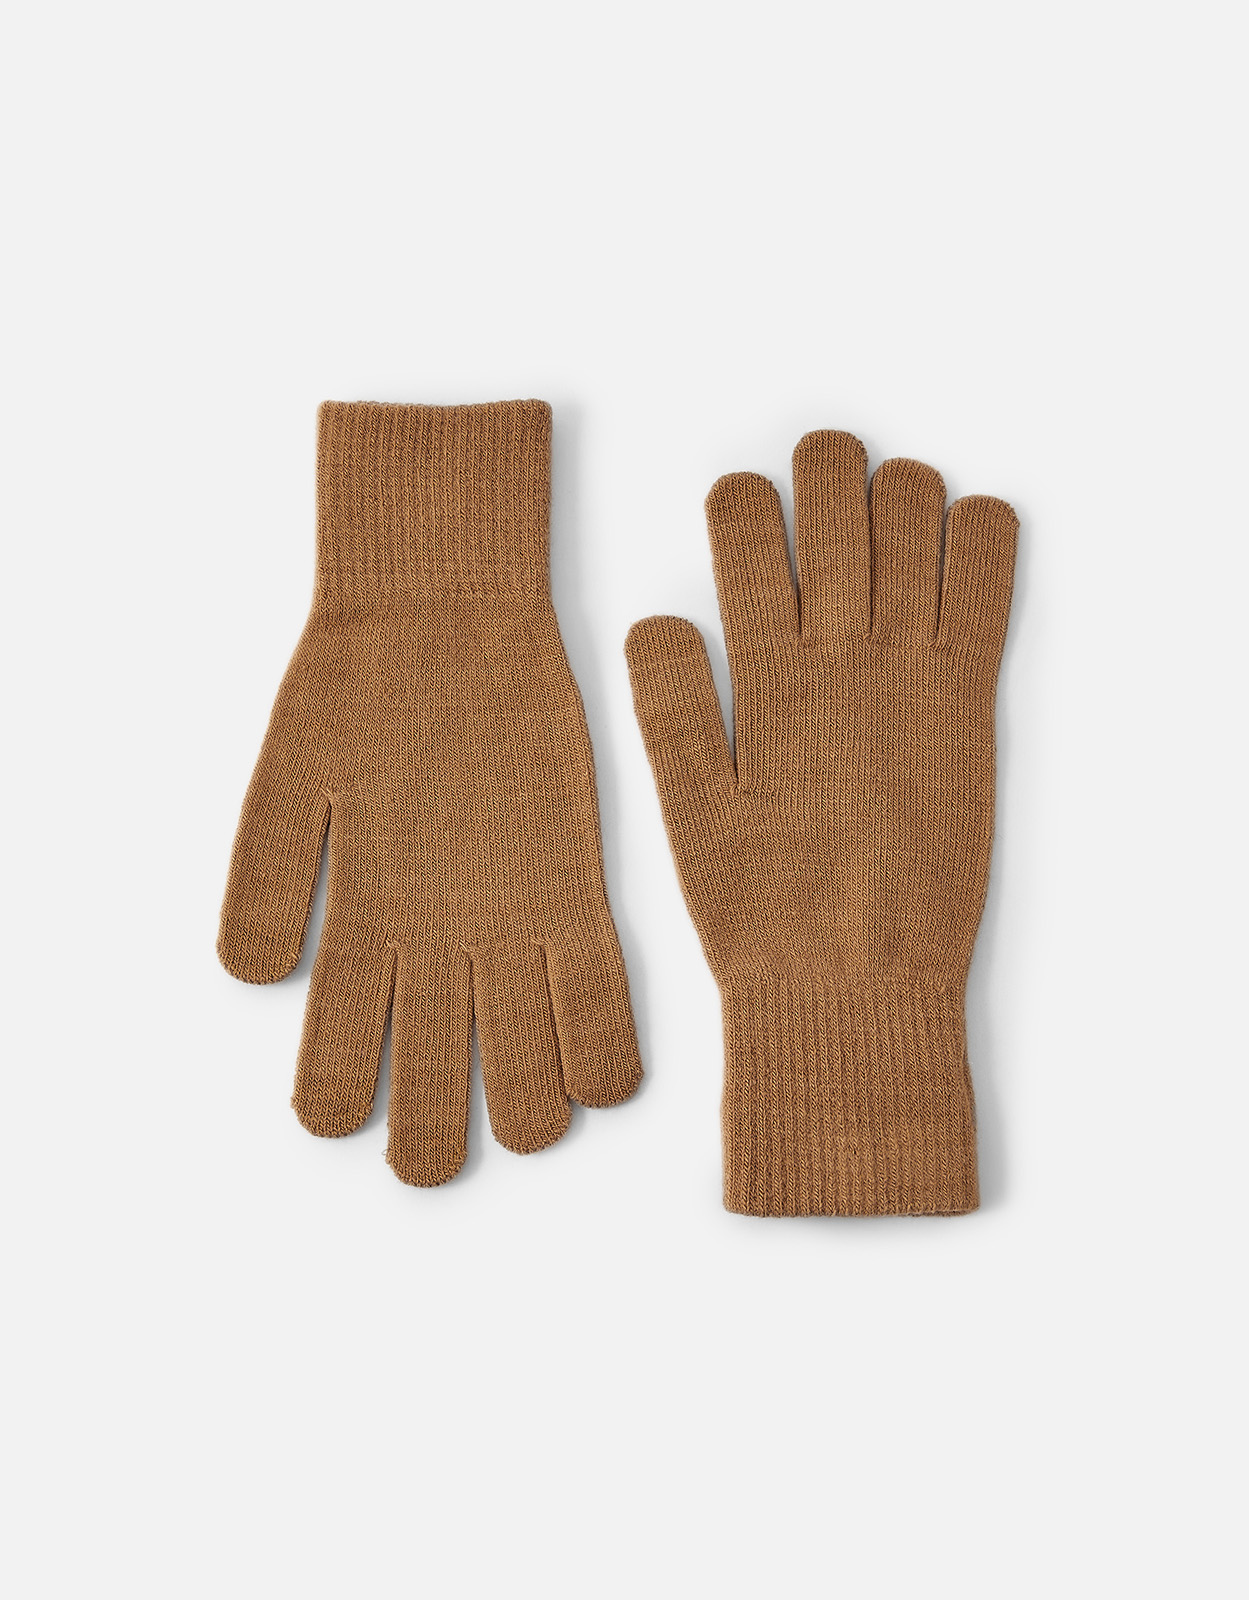 Accessorize Long Cuff Touchscreen Gloves Camel, Size: One Size